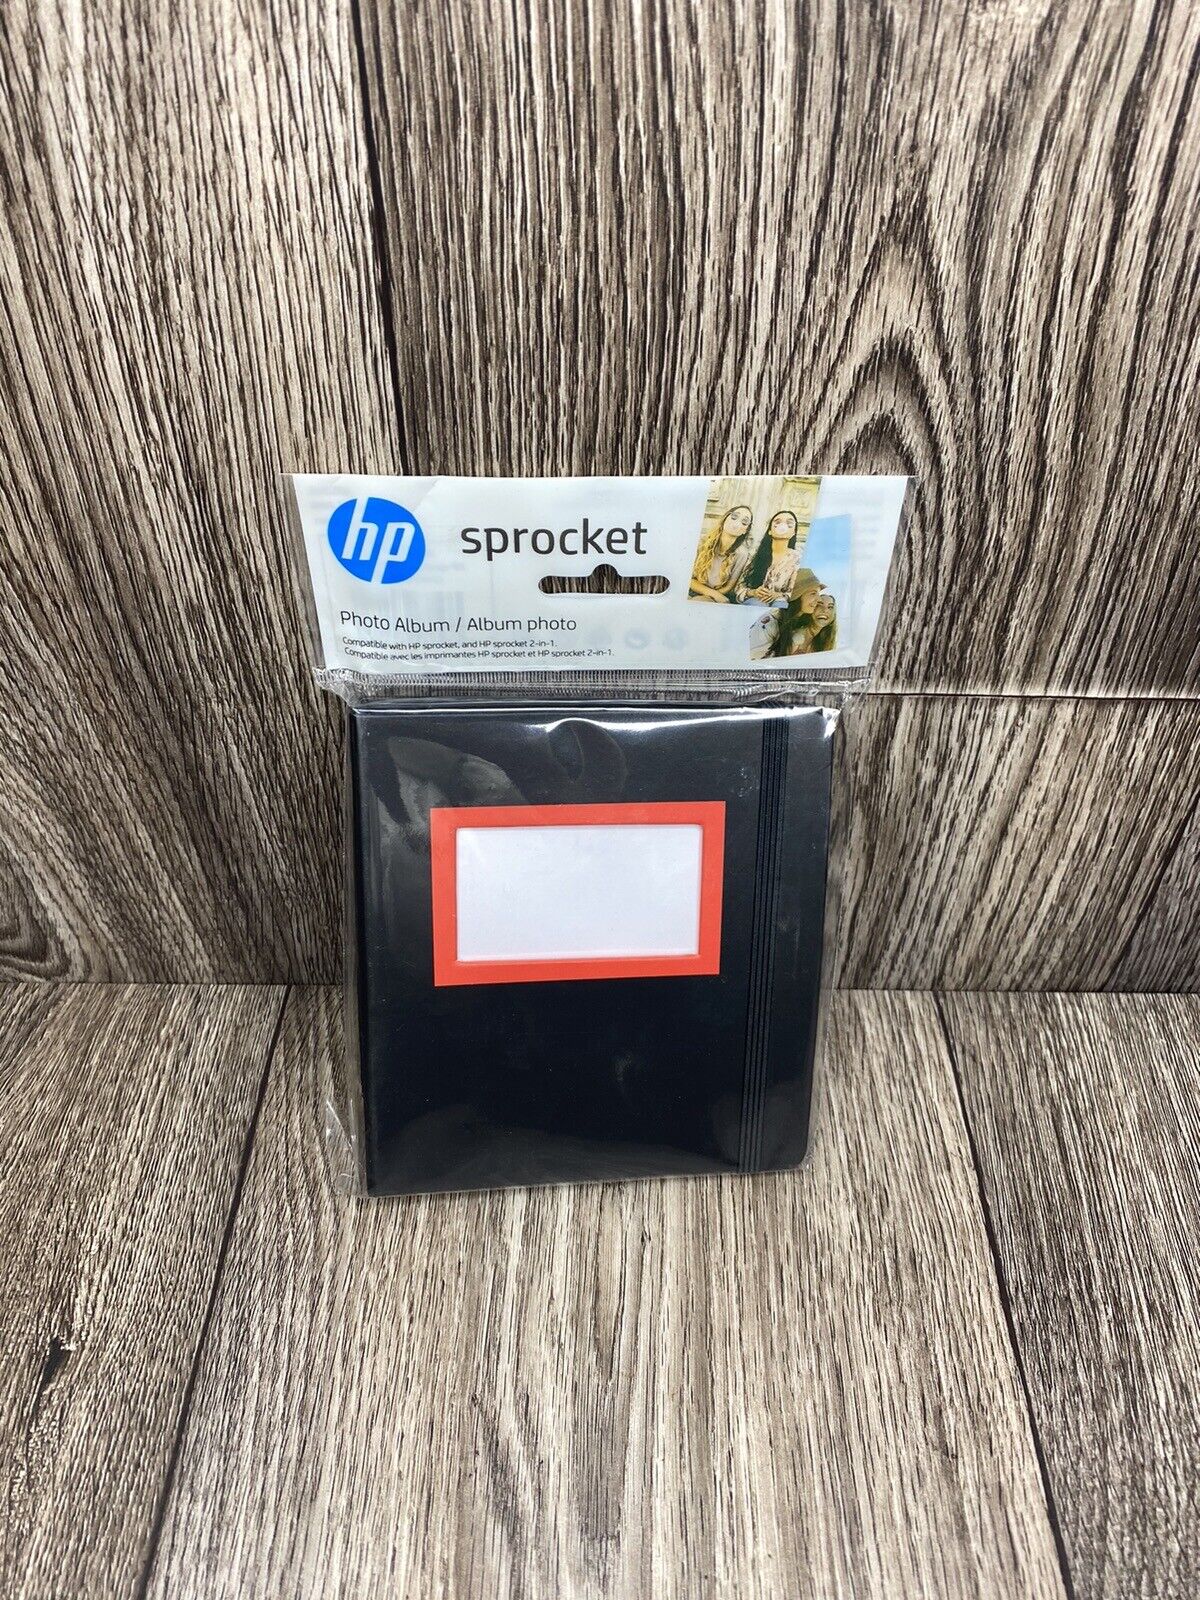 HP Sprocket Red and Black Photo Album (2HS30A)